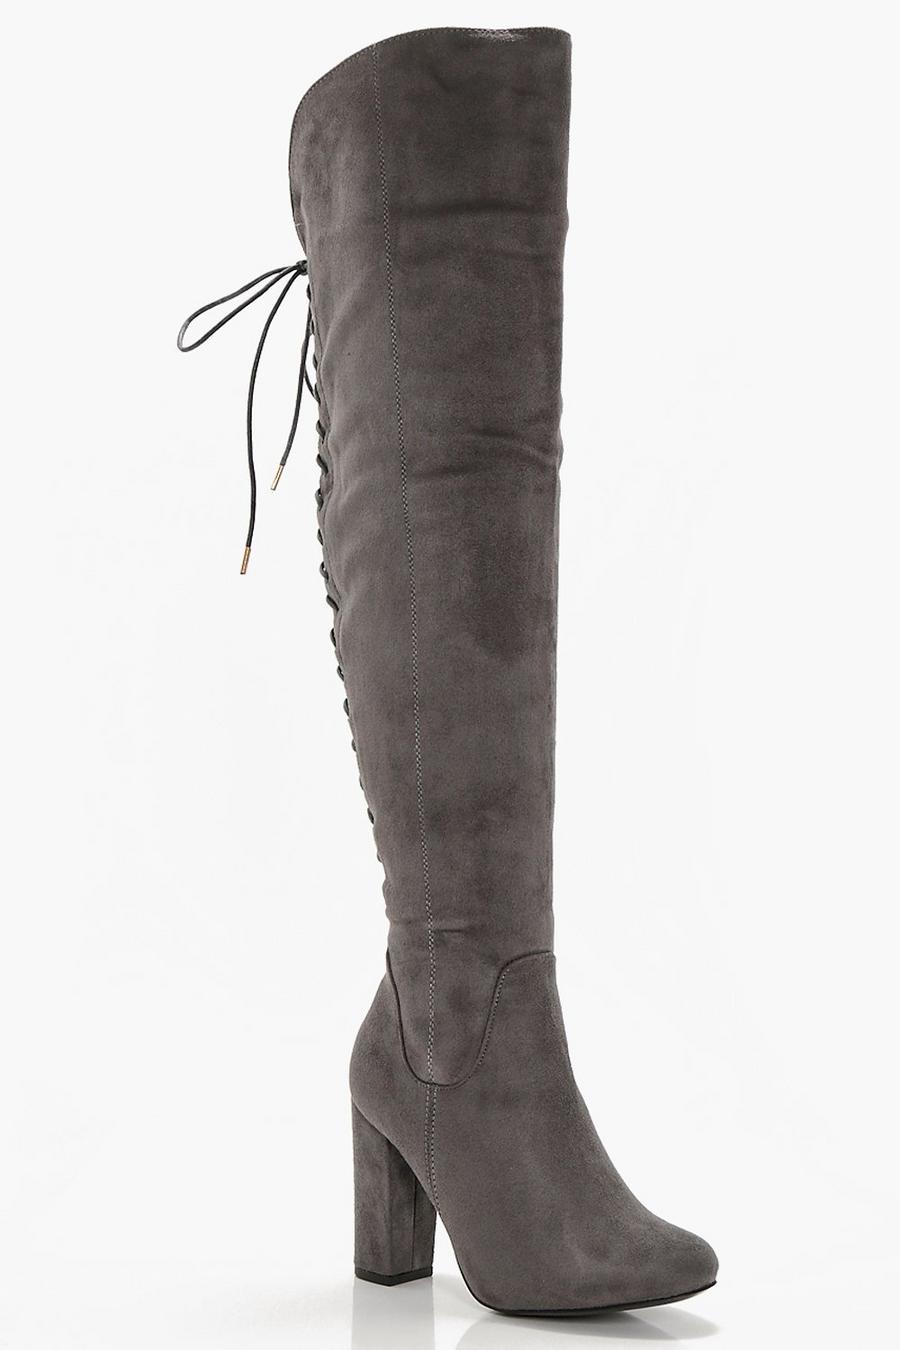 Grey grå Lace Back Block Heel Over The Knee High Boots